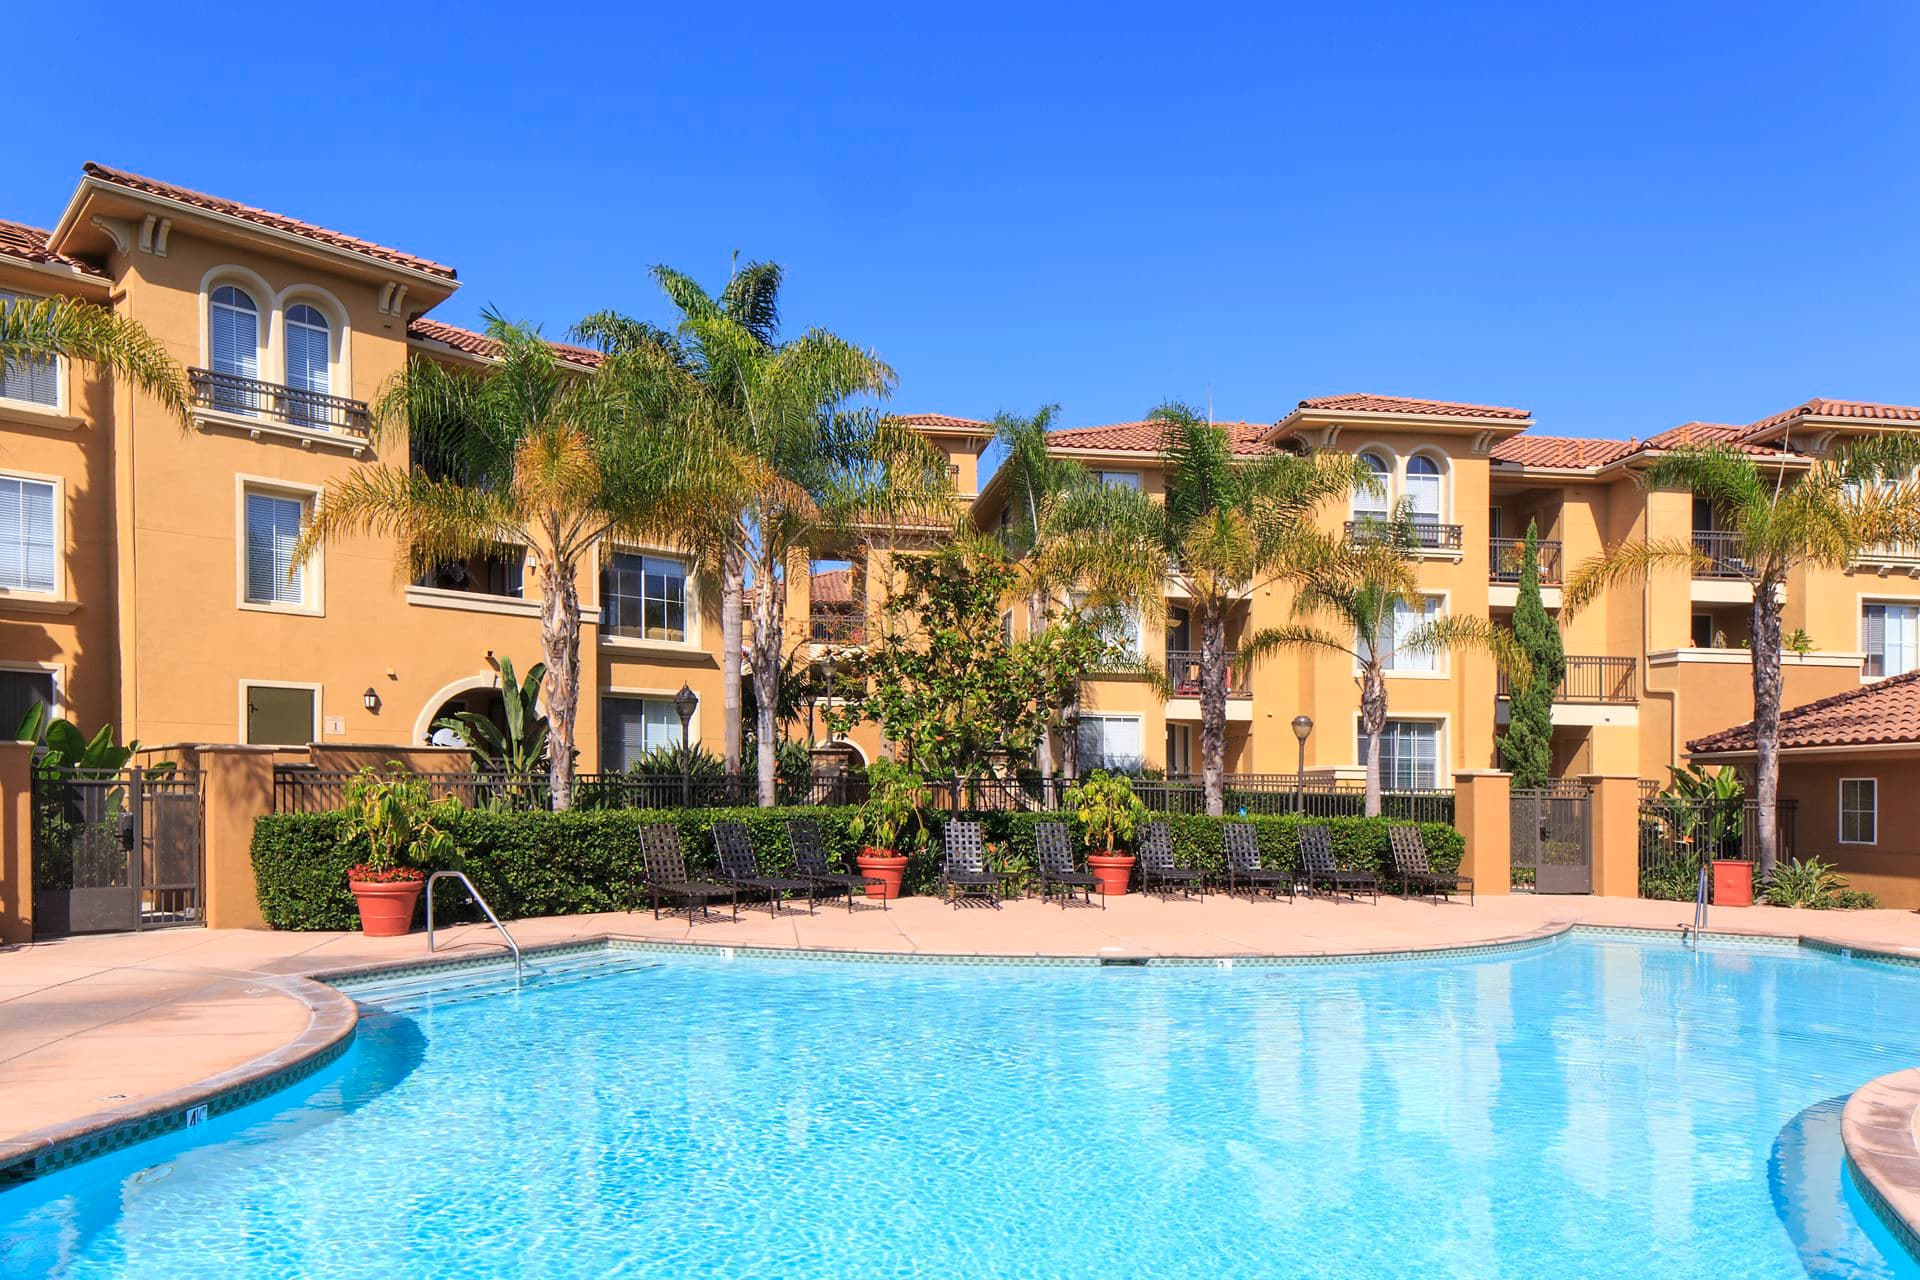 Exterior view of the pool at Newport Bluffs Apartment Homes in Newport Beach, CA. 